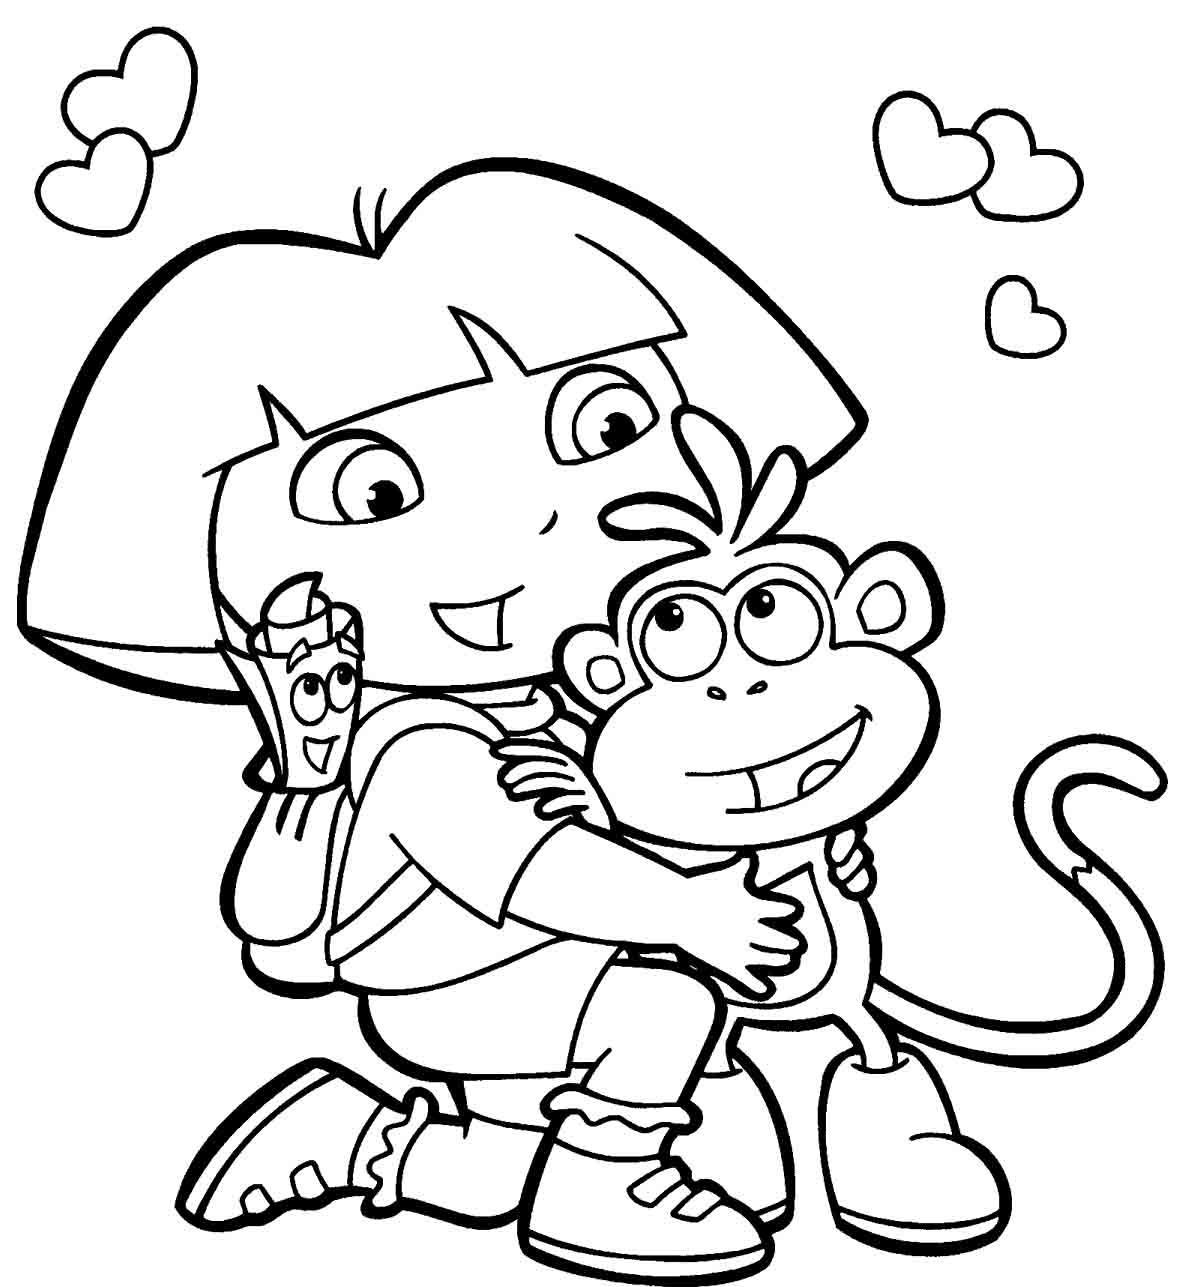 Coloring Pages Of Dora And Boots - High Quality Coloring Pages